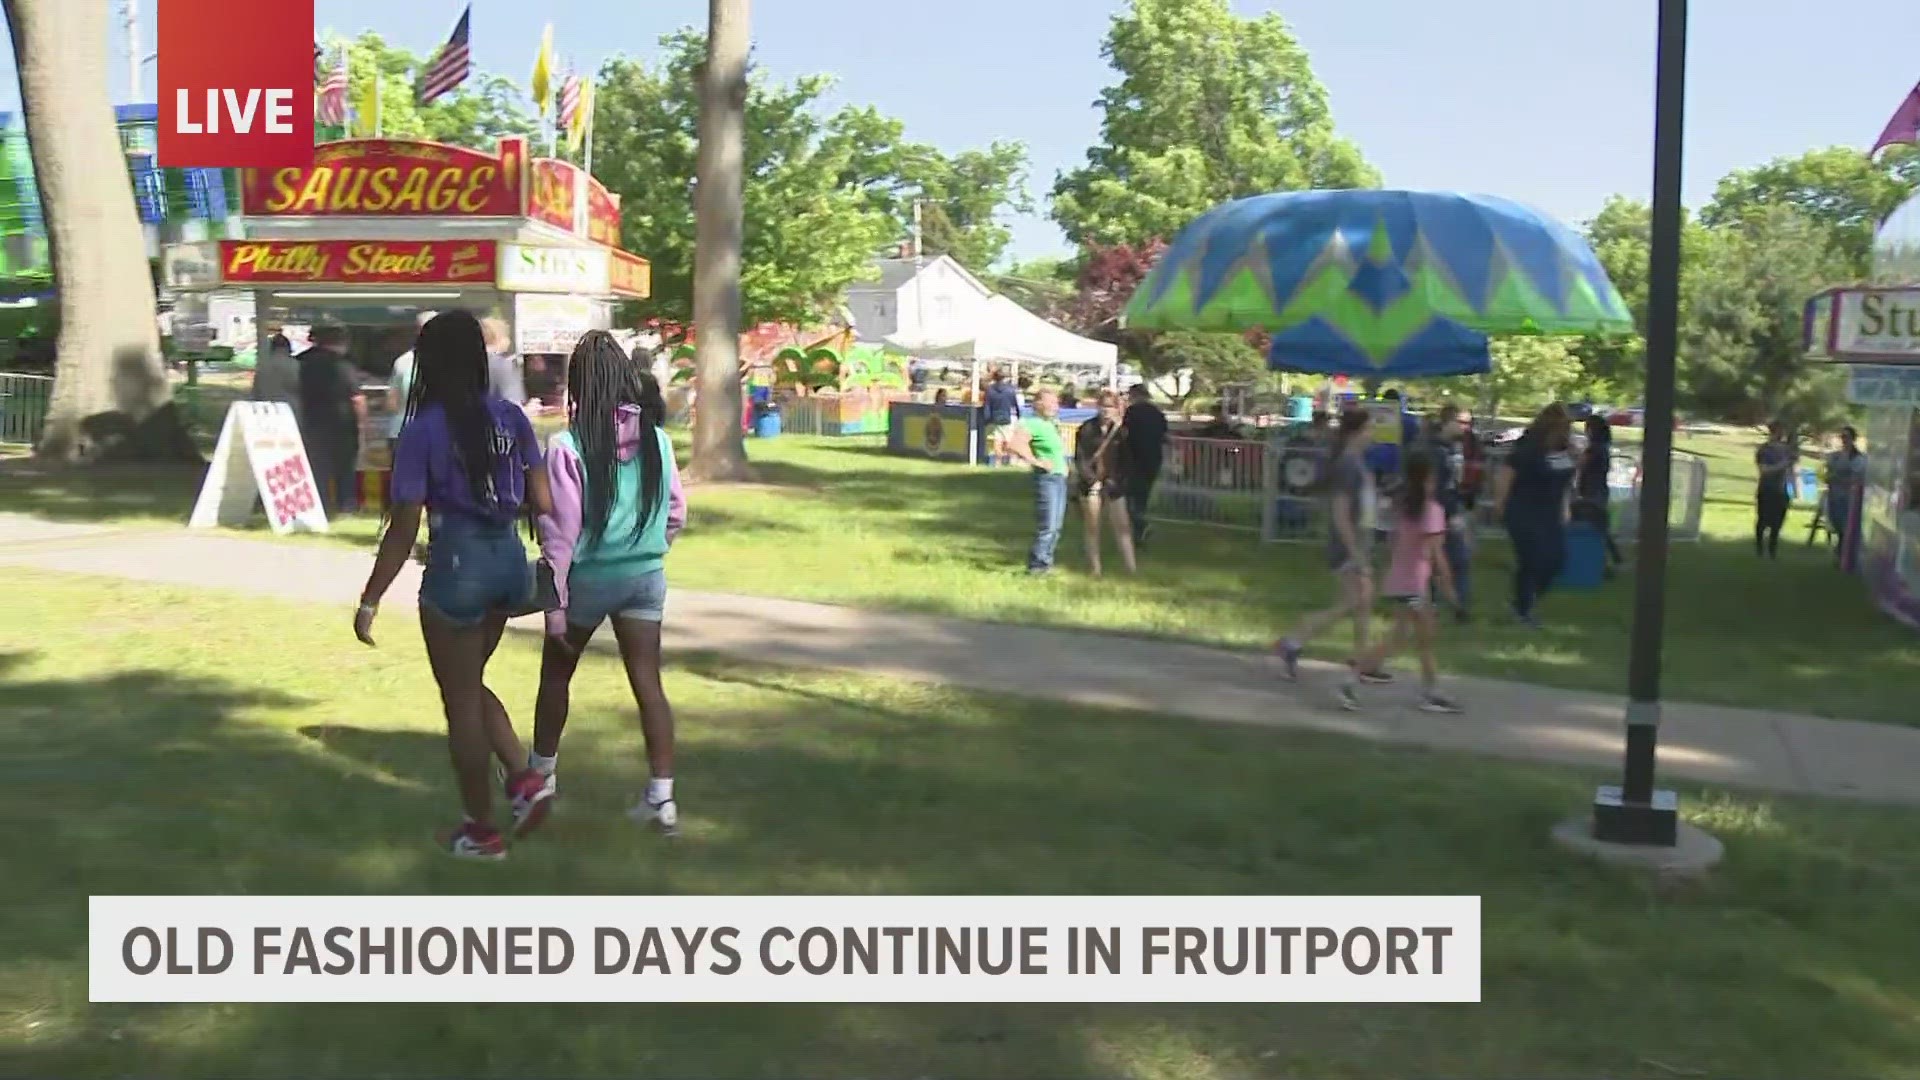 Old Fashioned Days is the largest fundraiser of the year for the Fruitport Lions Club.